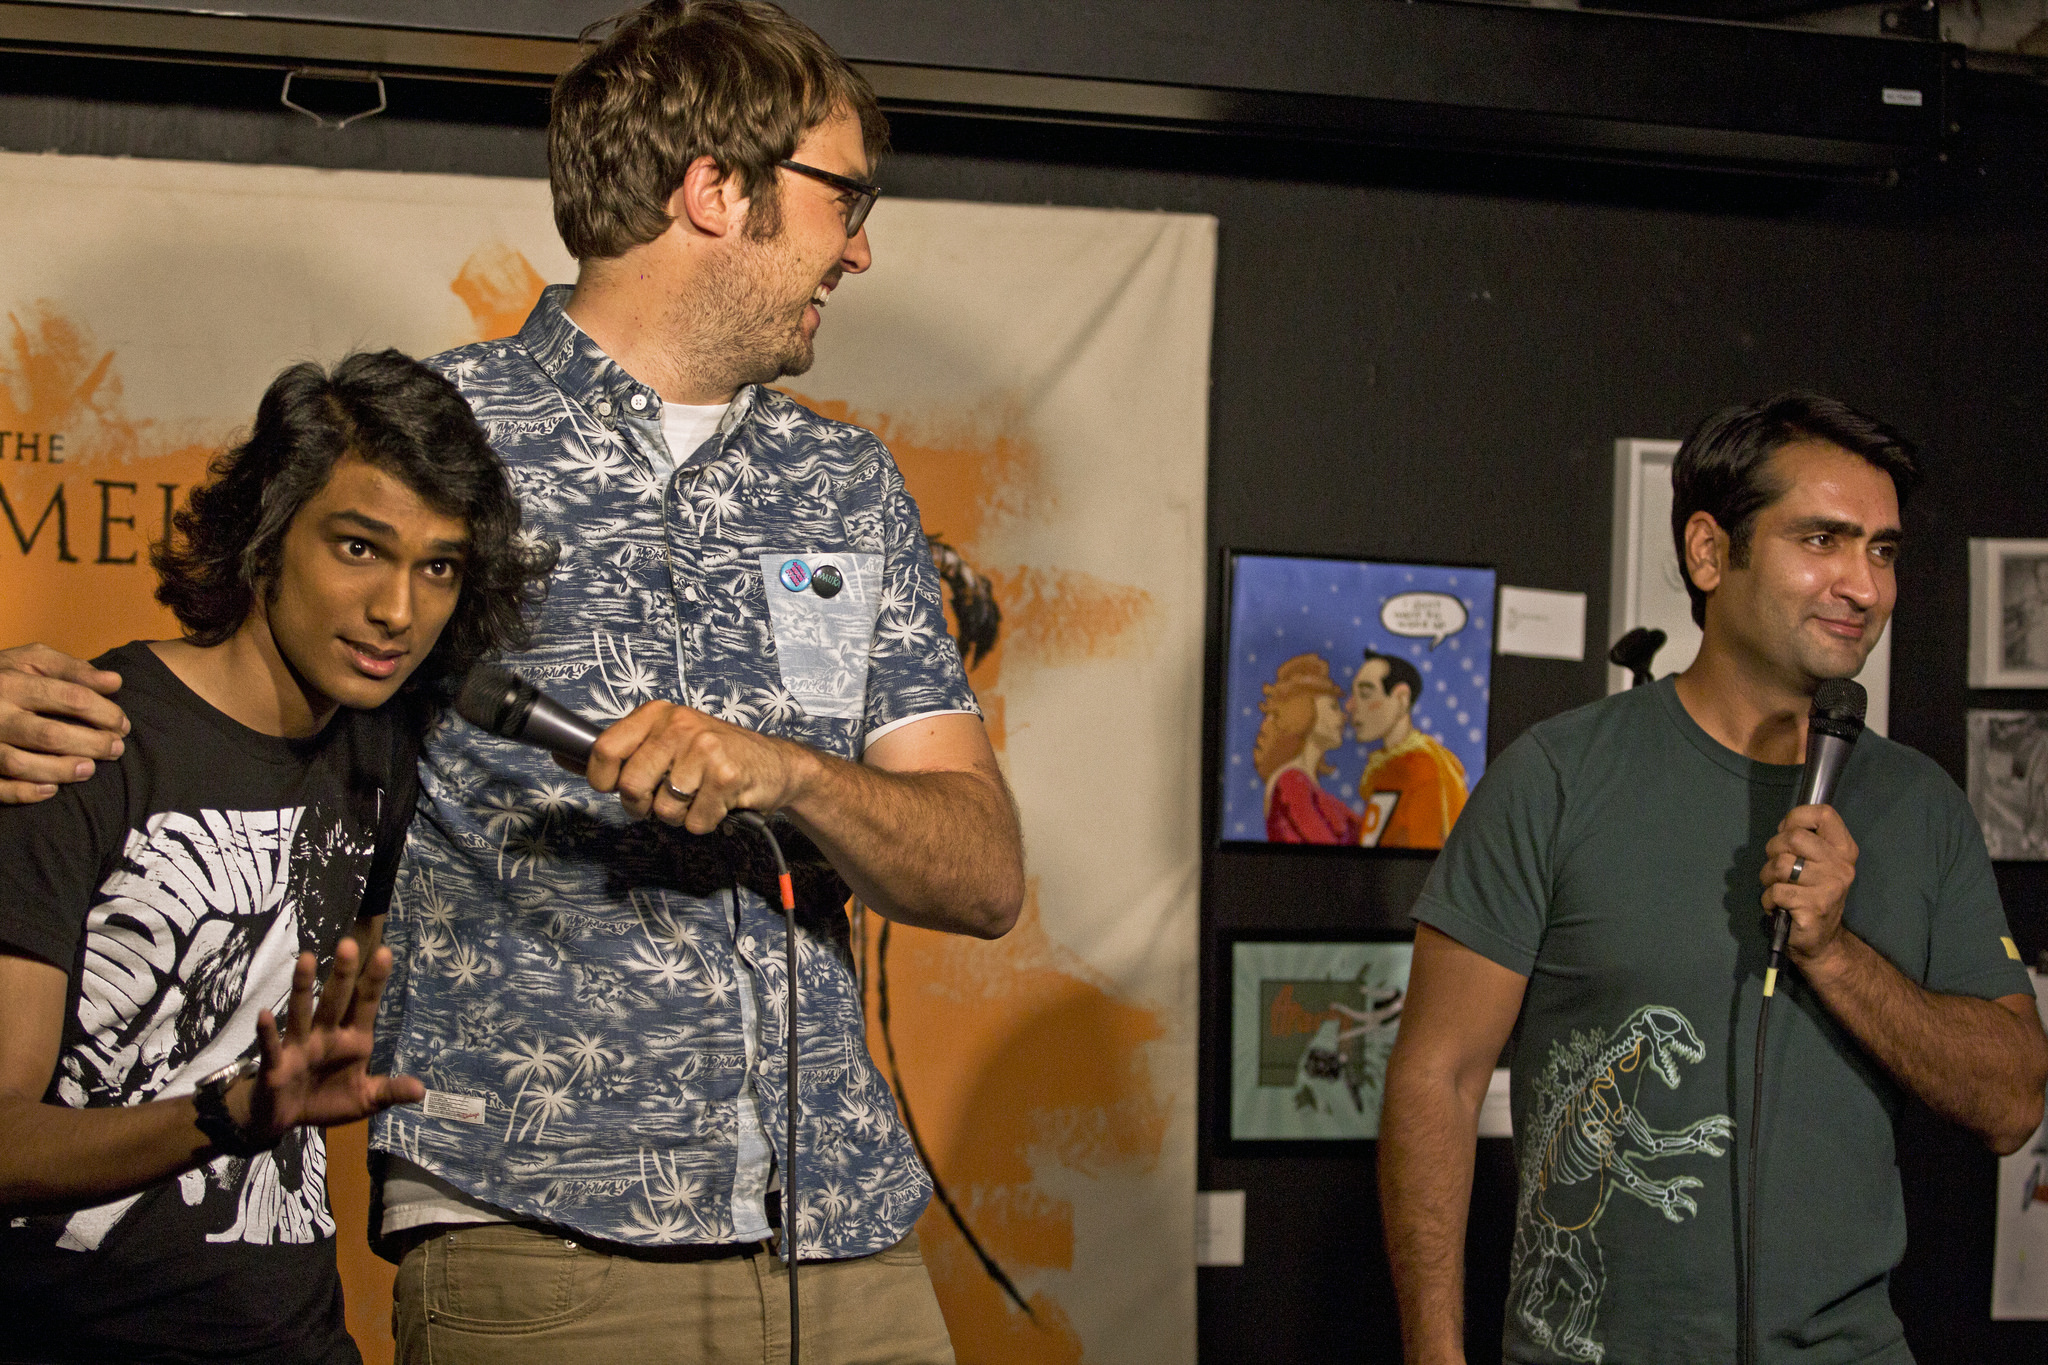 New Kumail doing his impression of Kumail, with Jonah and Kumail at The Meltdown @ NerdMelt LA.